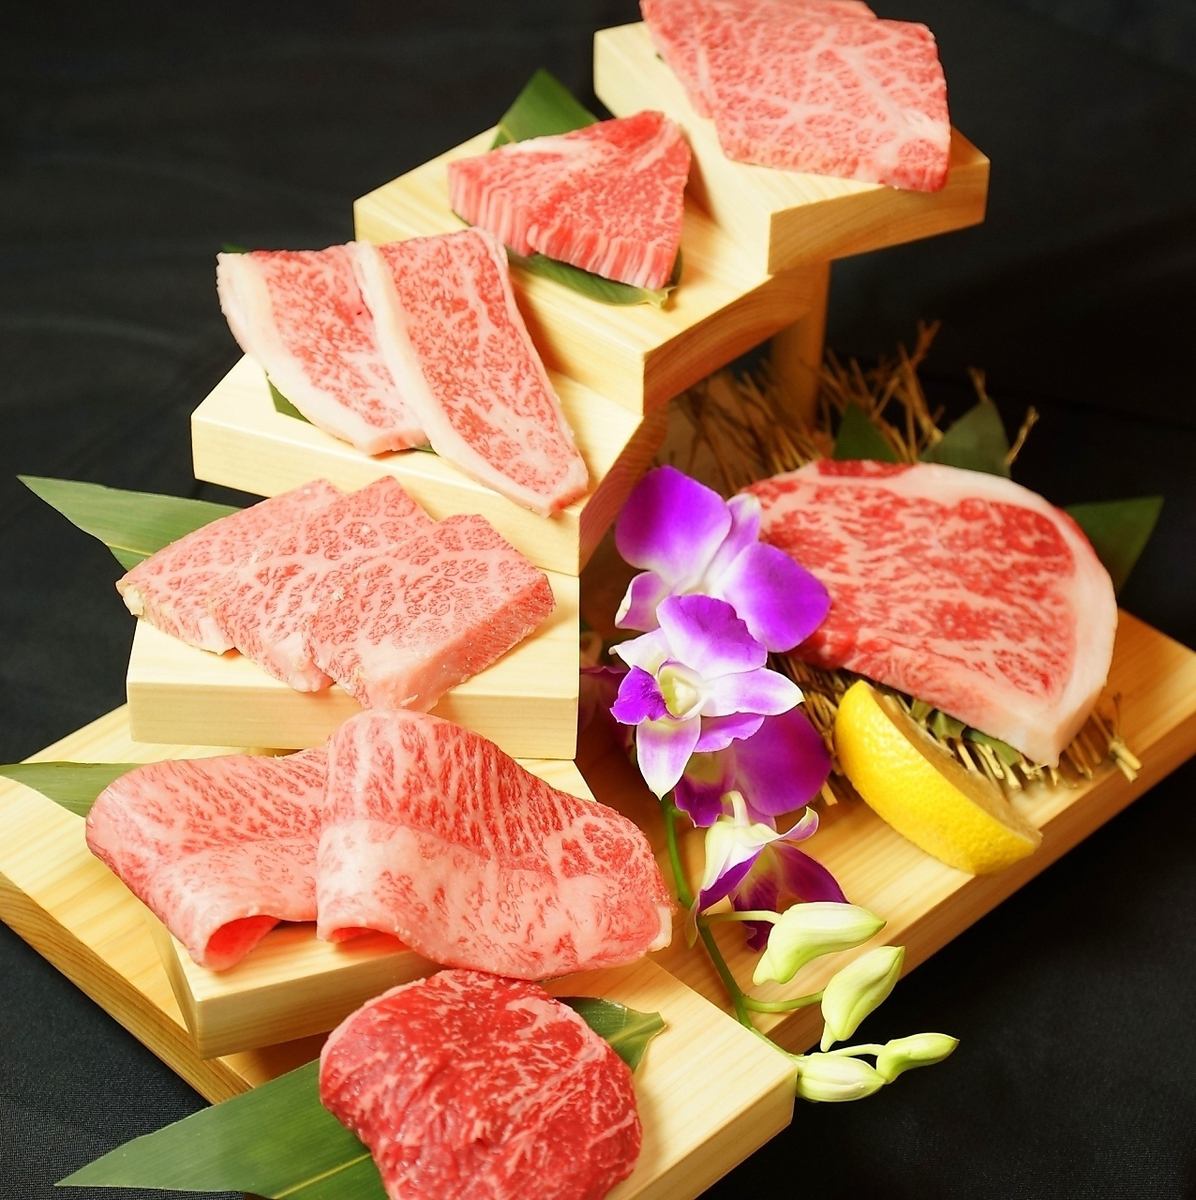 [Also open for lunch] You can enjoy A4 and A5 grade Japanese black beef raised on our own farm at a reasonable price.